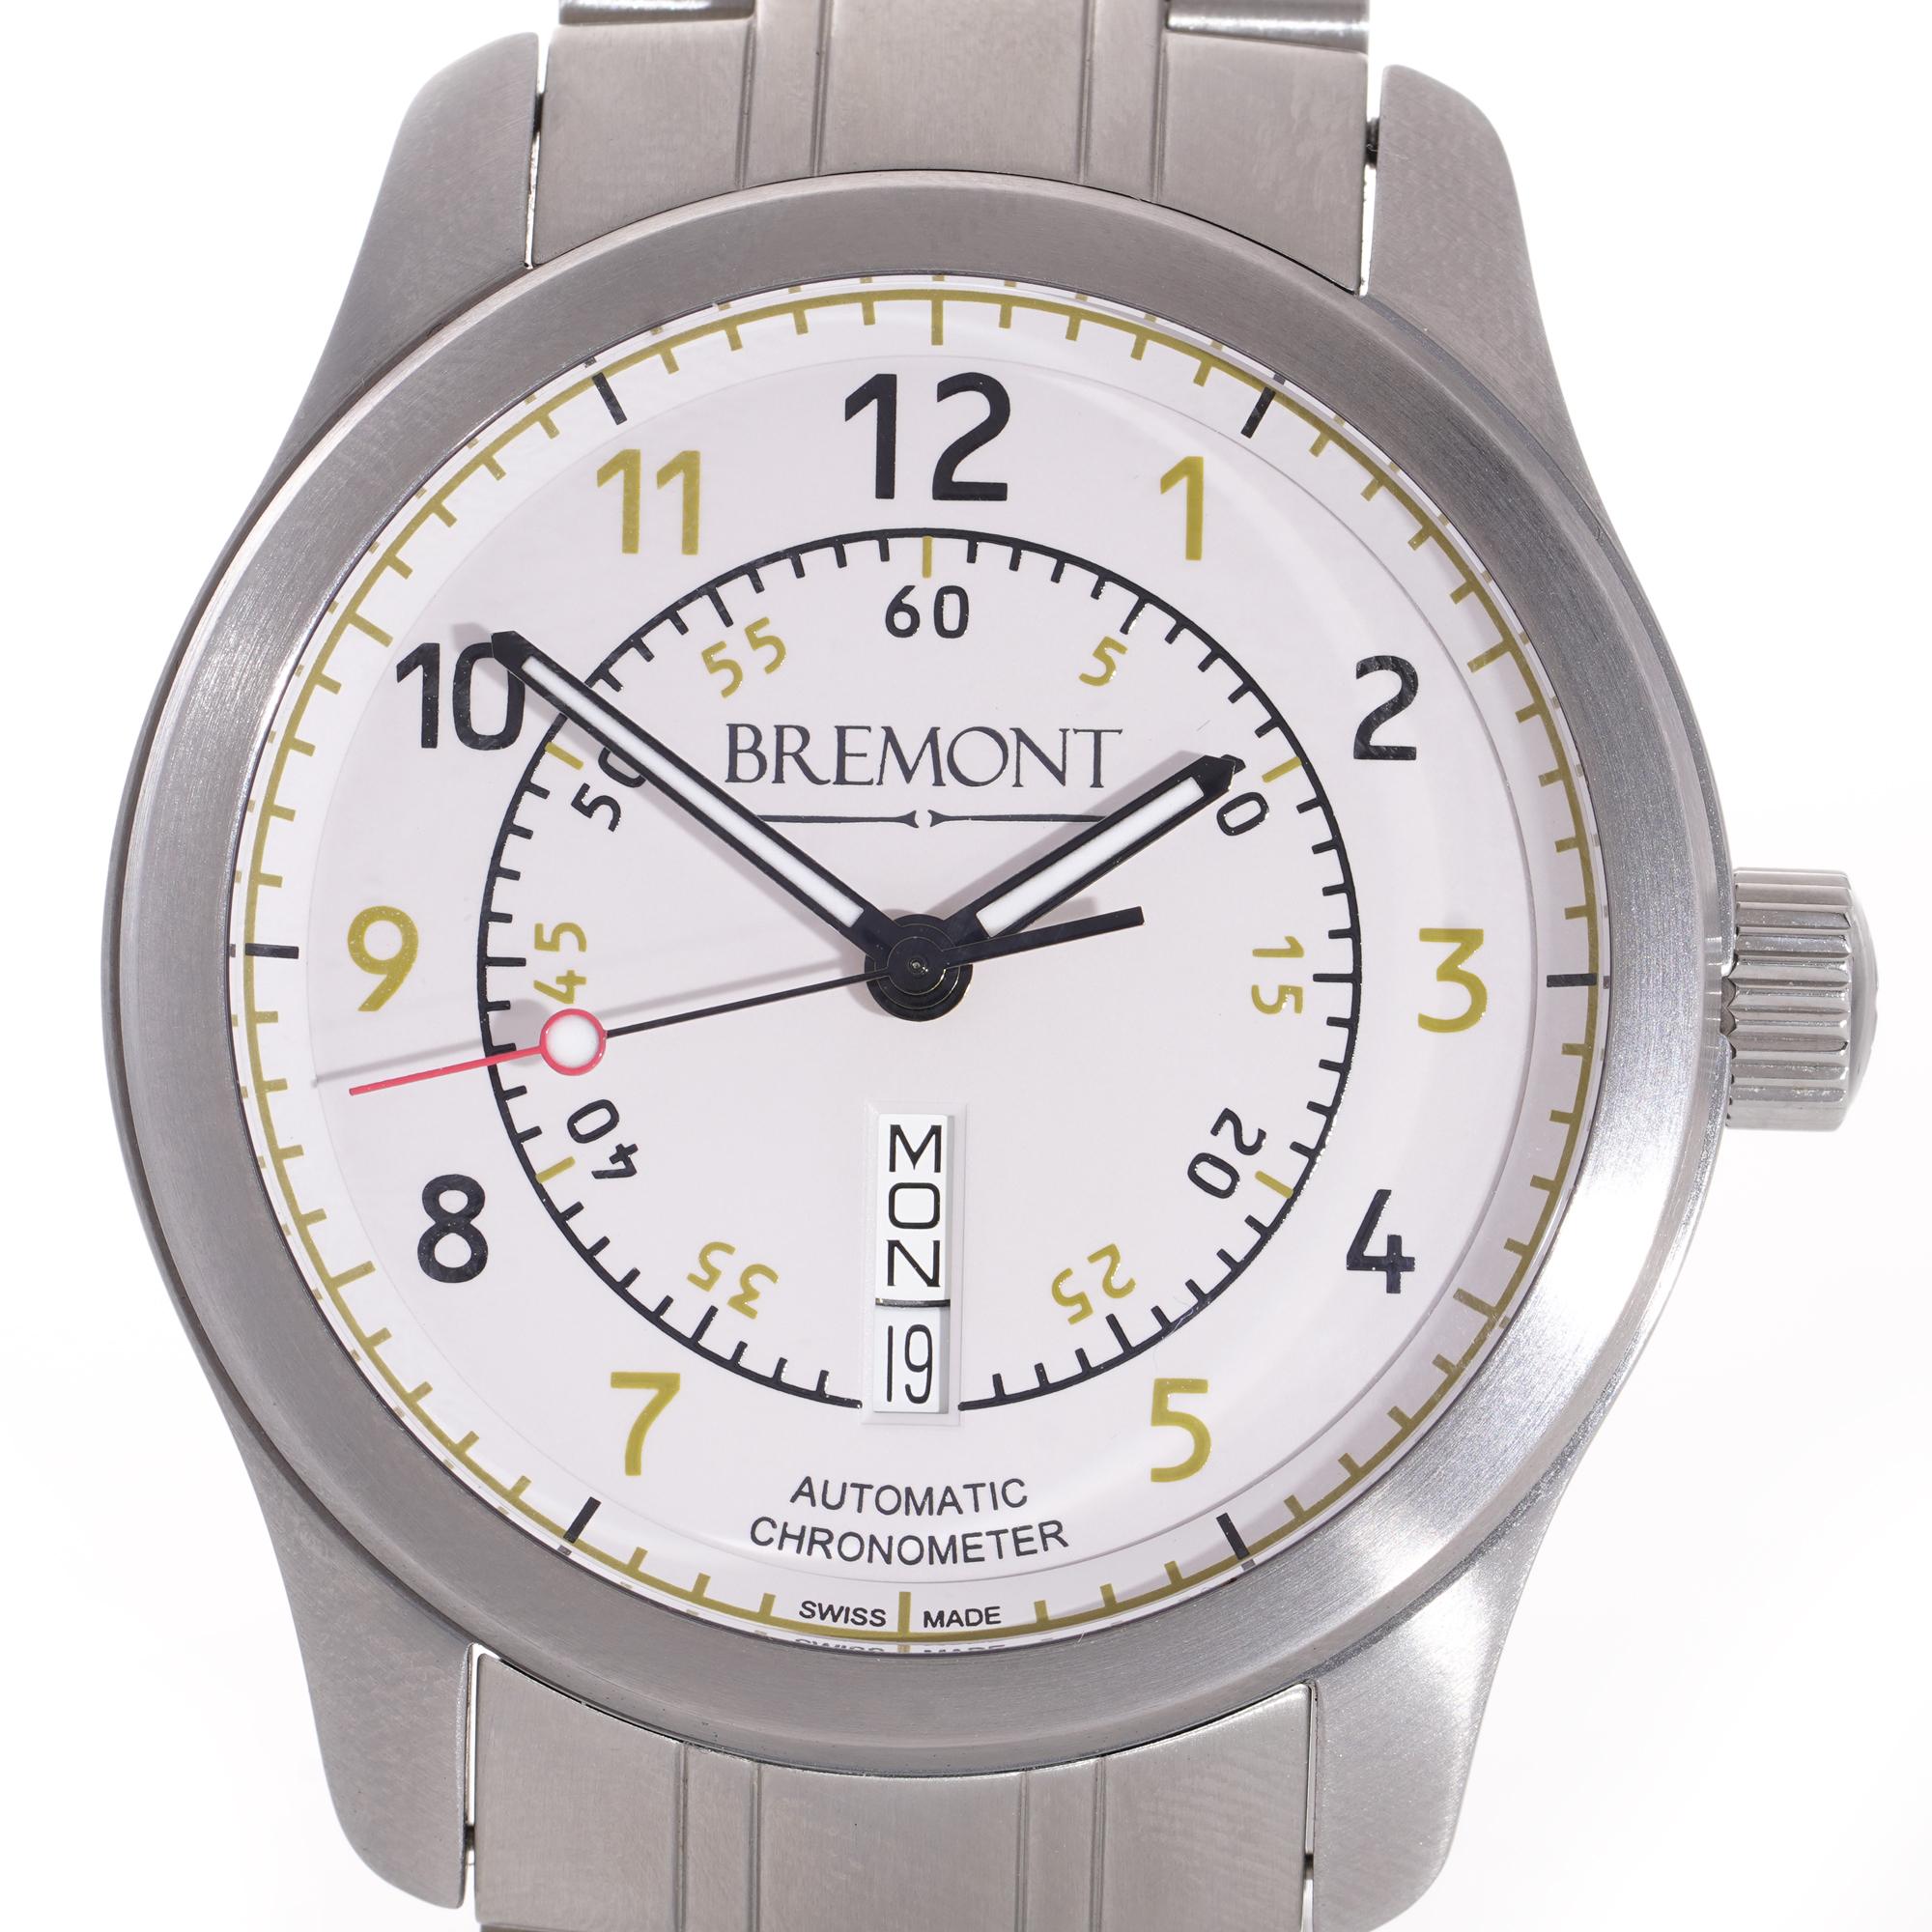 Bremont Stainless Steel Day Date Chronometer,	BC-S2 men's wristwatch. 

Gender: Men
Case Size: 43 mm
Movement: Automatic Chronometer 
Watchband Material: Stainless Steel 
Case material: Steel
Dial colour: White 
Hands: black/red luminous